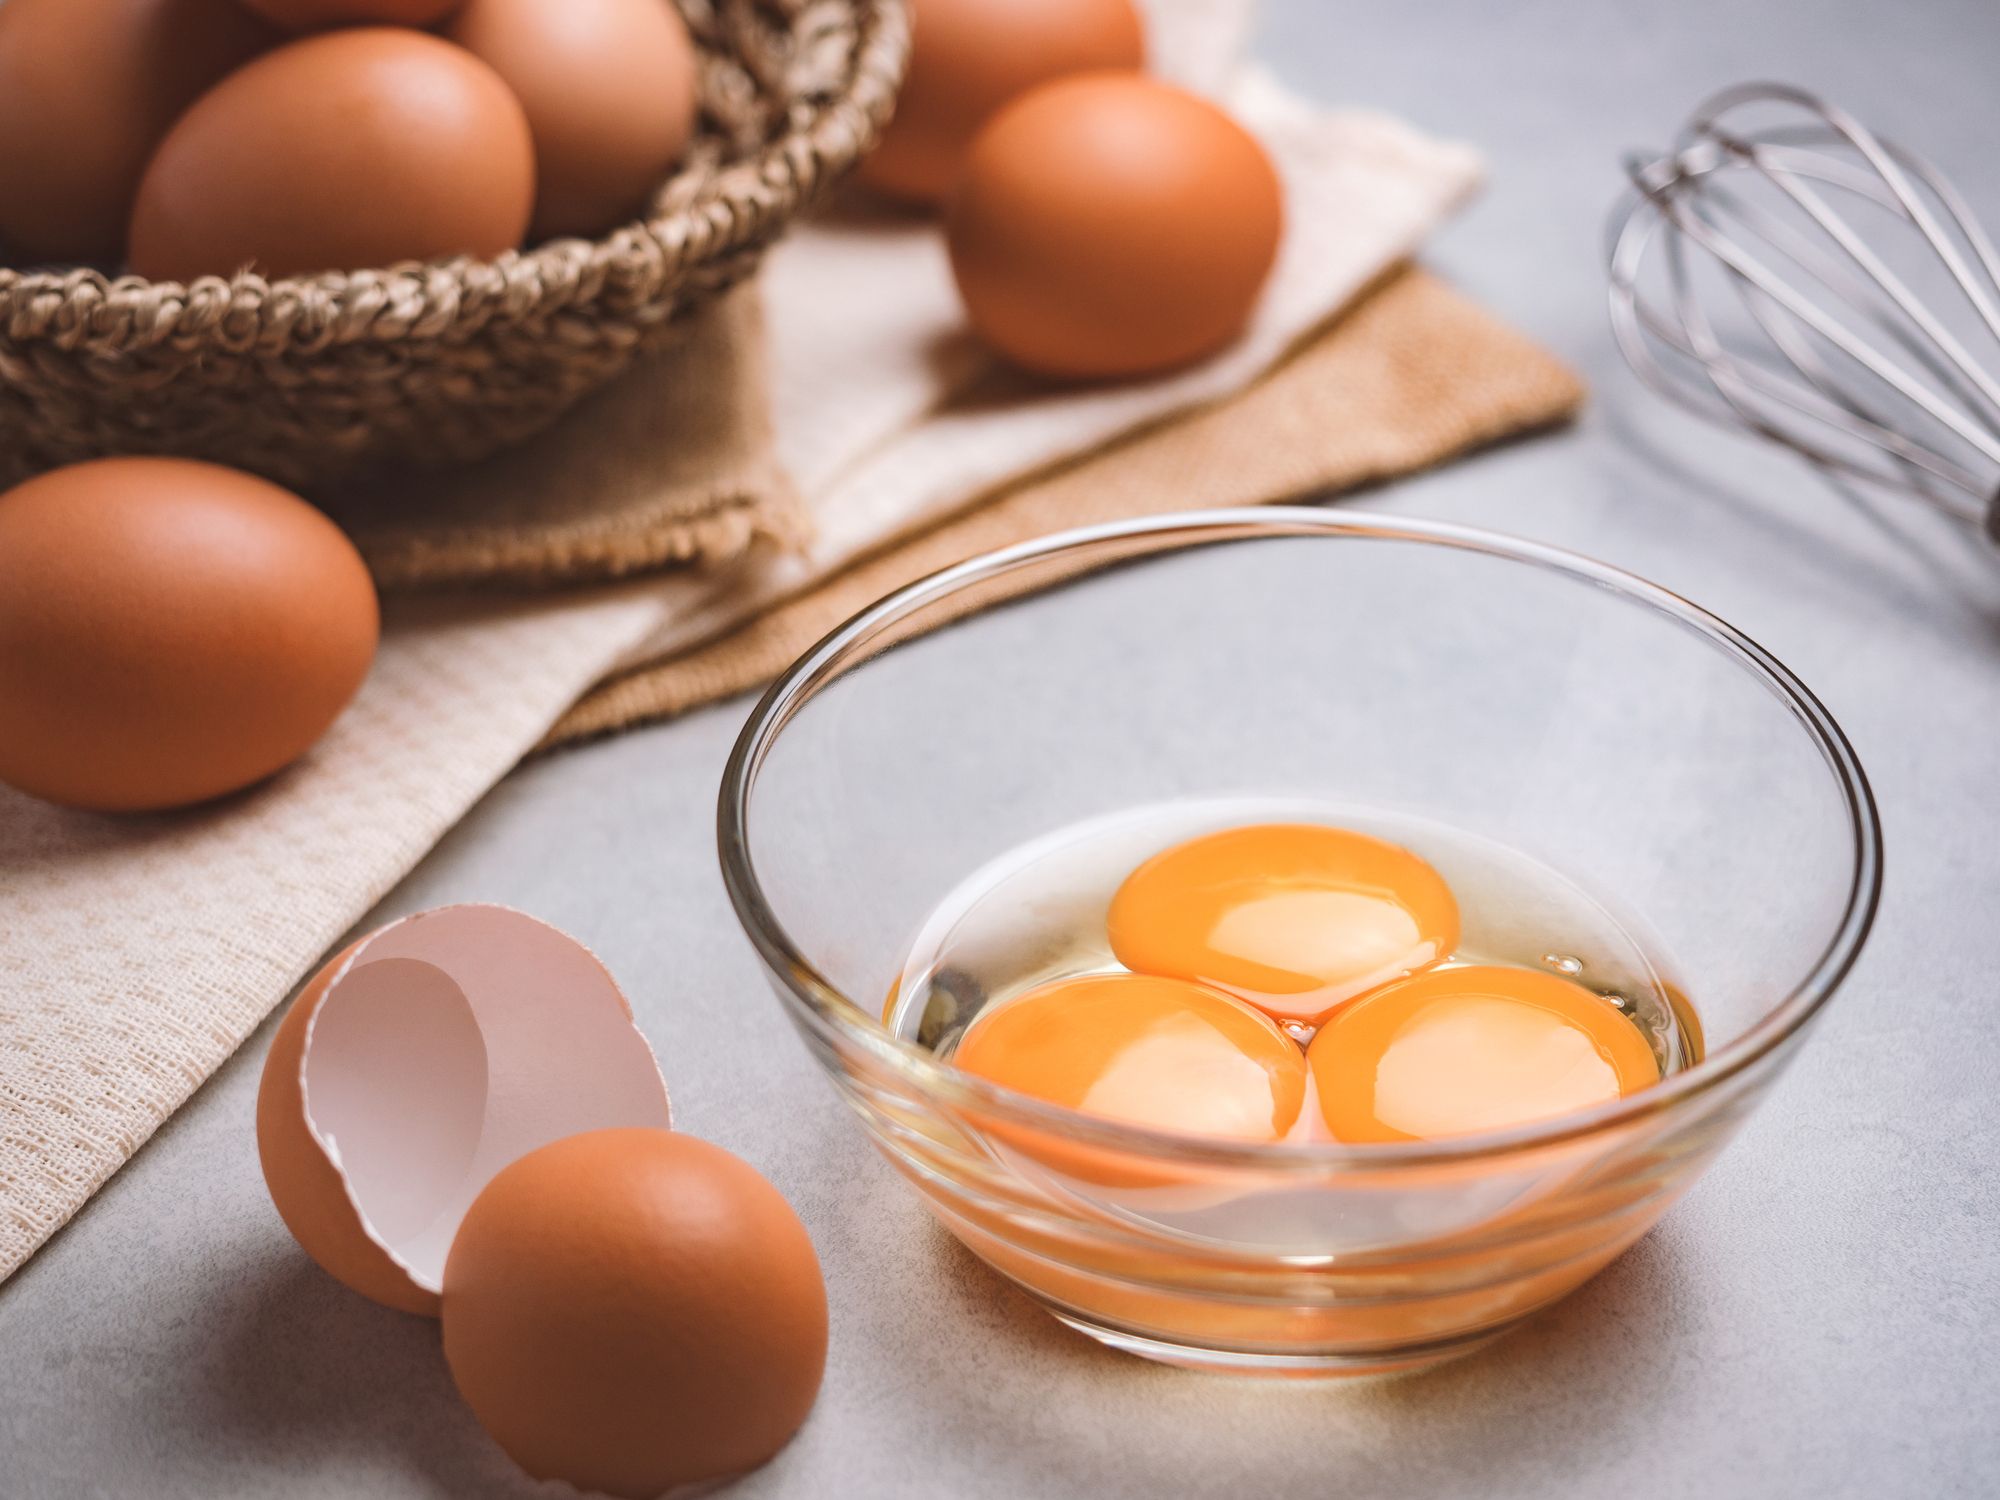 18 Best Egg Substitutes - How to Replace Eggs in Baking